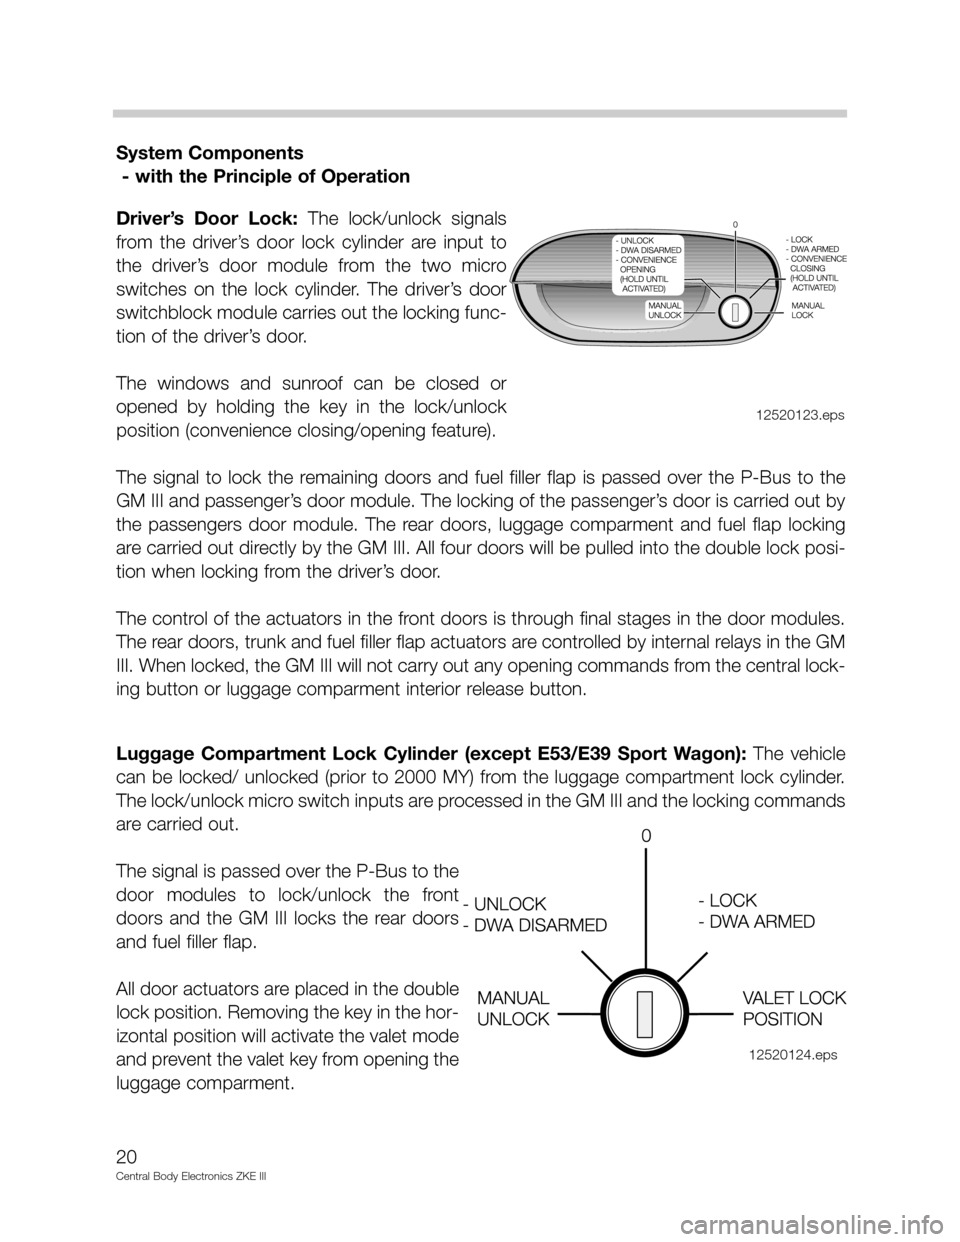 BMW 525I 1998 E39 Central Body Electronics ZKE Manual System Components 
- with the Principle of Operation
Driver’s  Door  Lock: The  lock/unlock  signals
from  the  driver’s  door  lock  cylinder  are  input  to
the  driver’s  door  module  from  